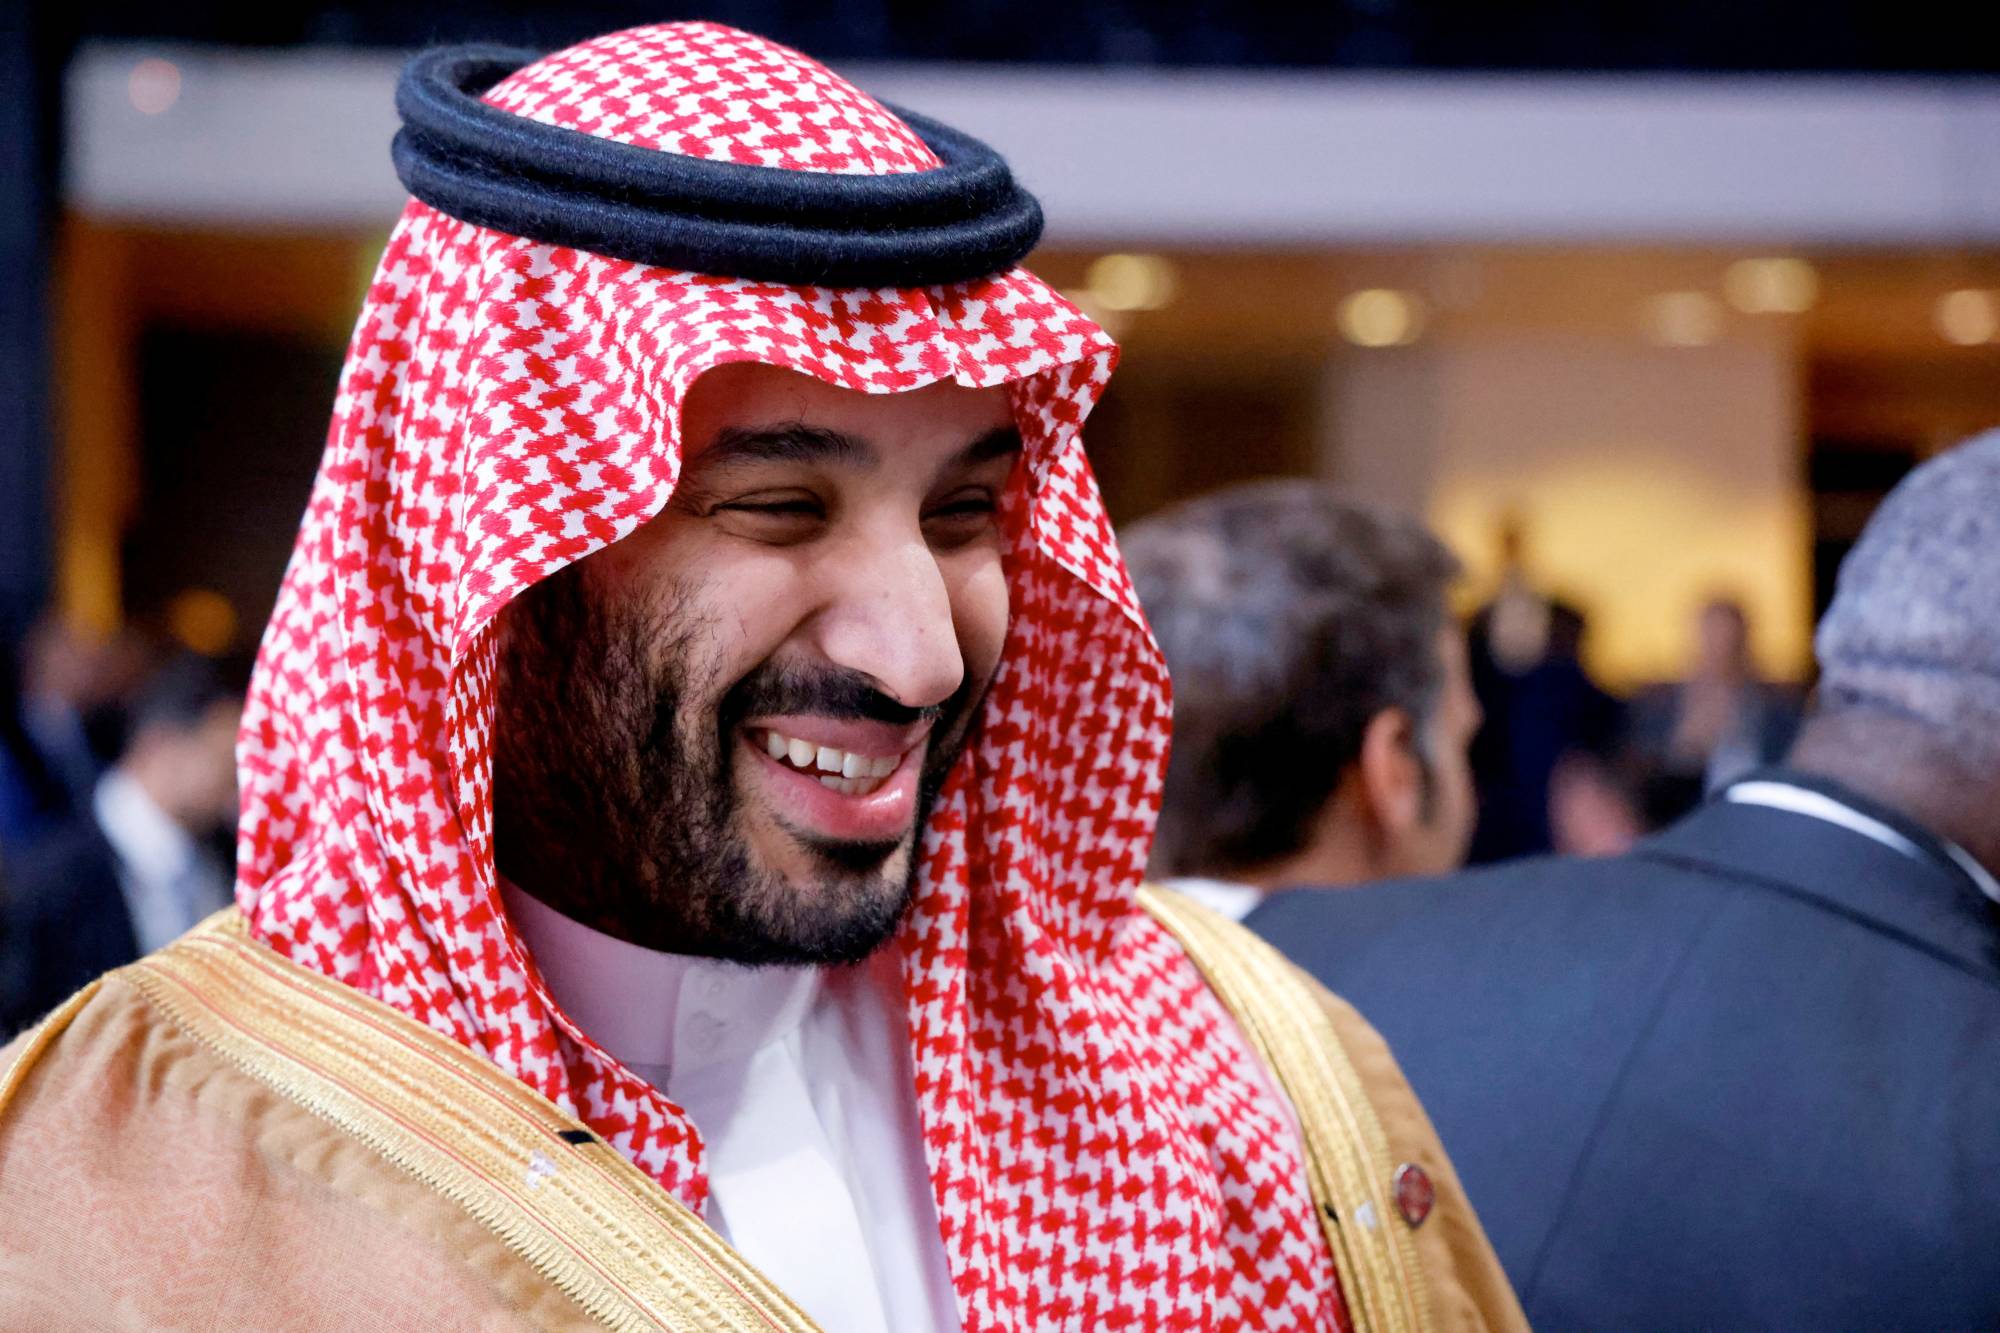 Saudi Crown Prince Mohammed bin Salman during the New Global Financial Pact Summit at the Palais Brogniart in Paris, on June 22. | POOL / VIA REUTERS